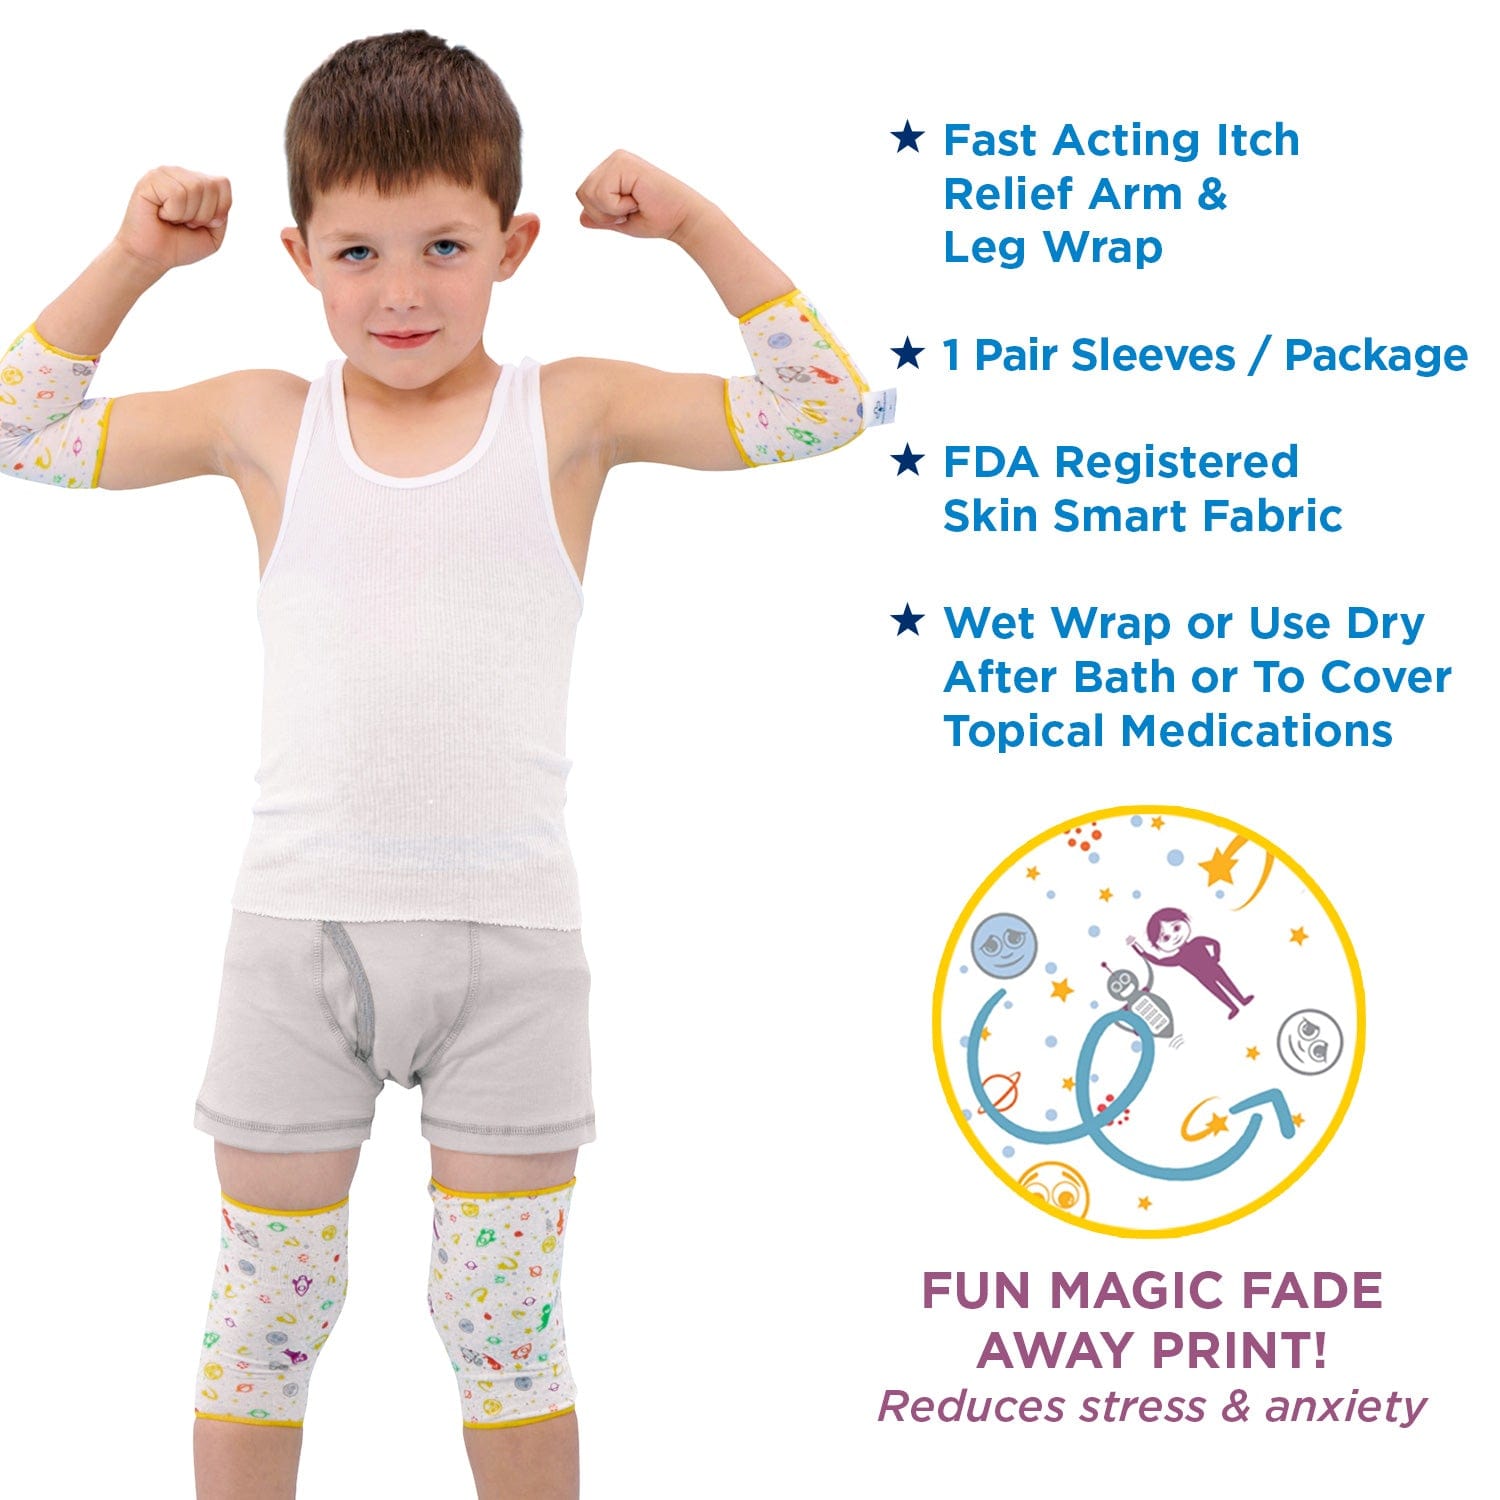 “Eczema Baby Sleeves with anti scratch TENCEL and zinc oxide to Control arm and leg, knee, ankle and foot itching at Night”